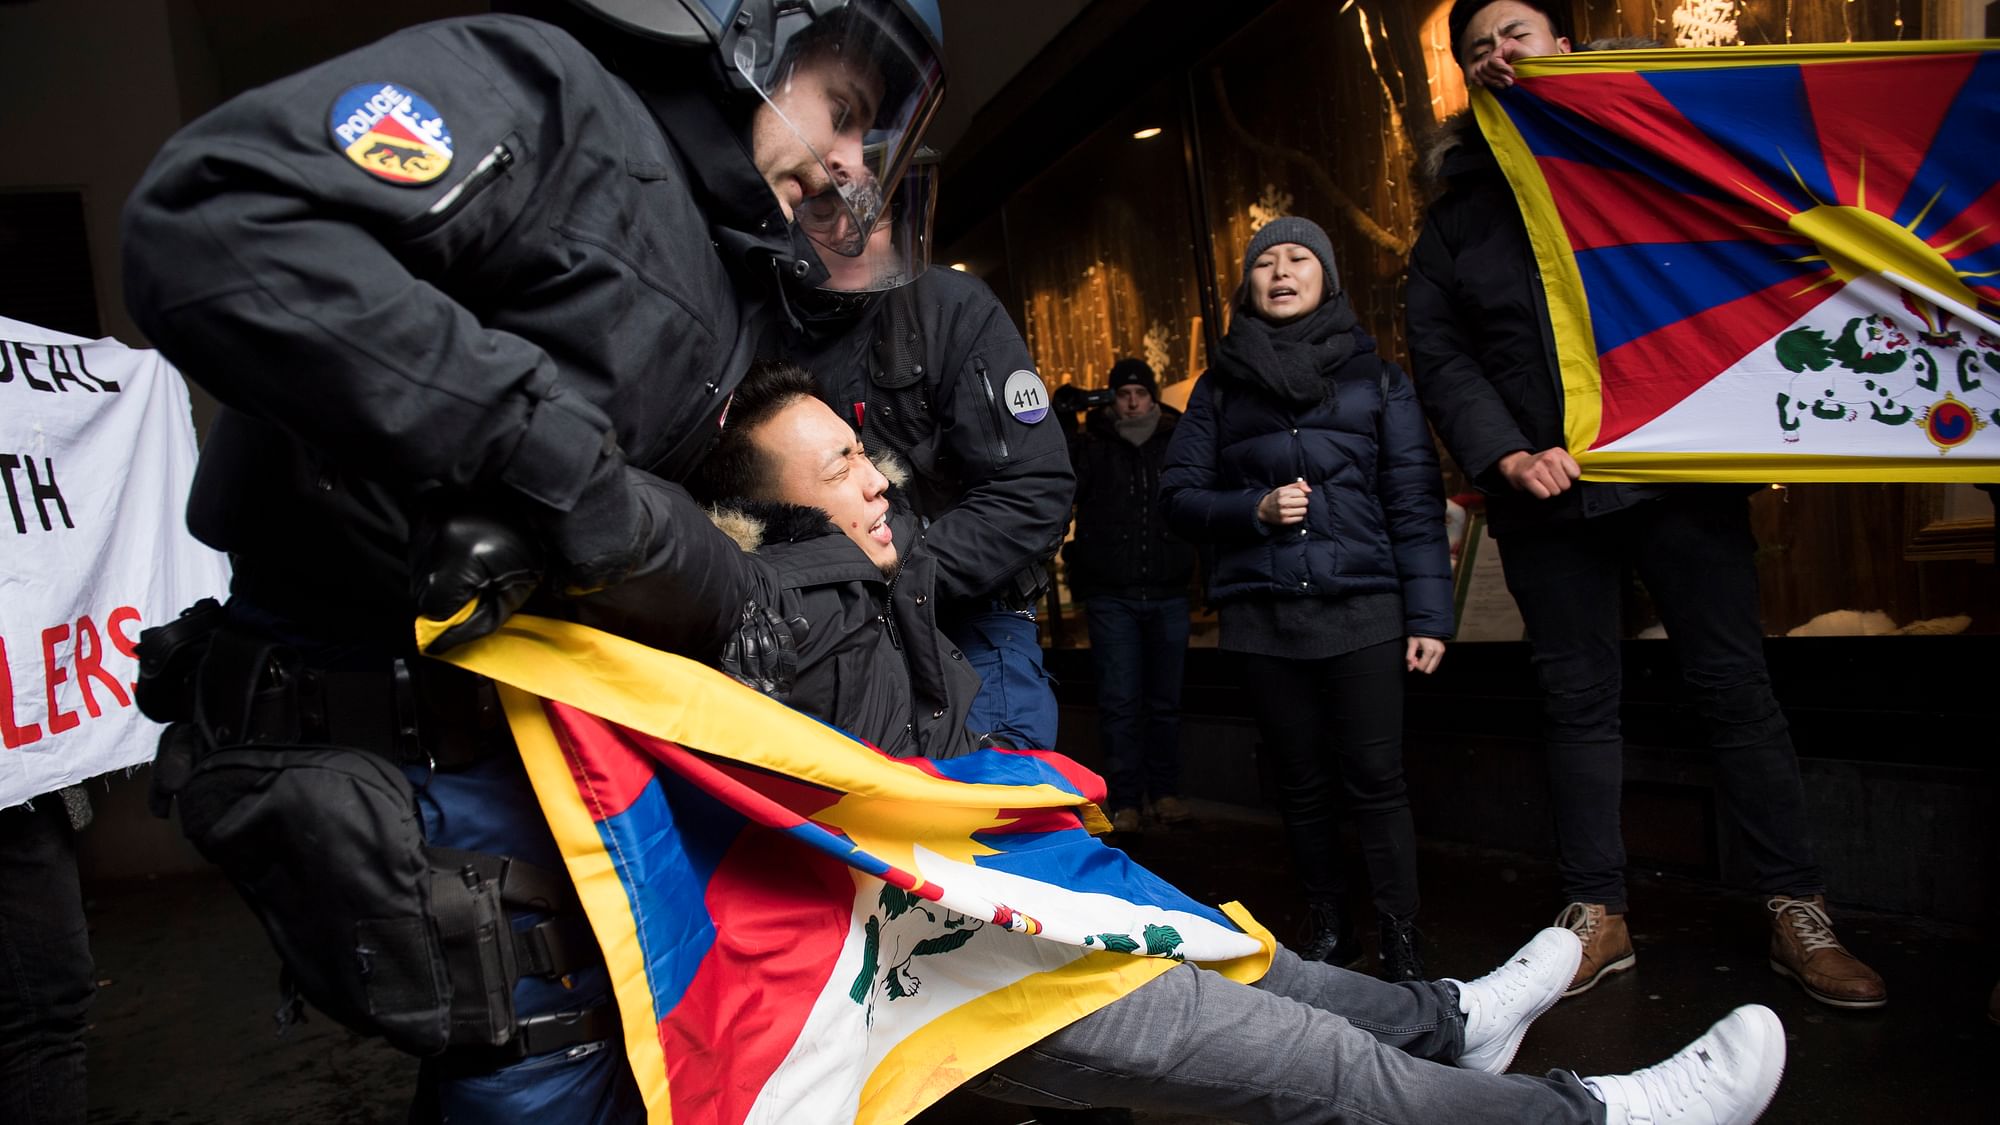 People protest for a free Tibet and against the arrival of China’s President Xi Jinping in Bern, Switzerland, on Sunday, 15 January 2017. (Photo Courtesy: AP Exchange)